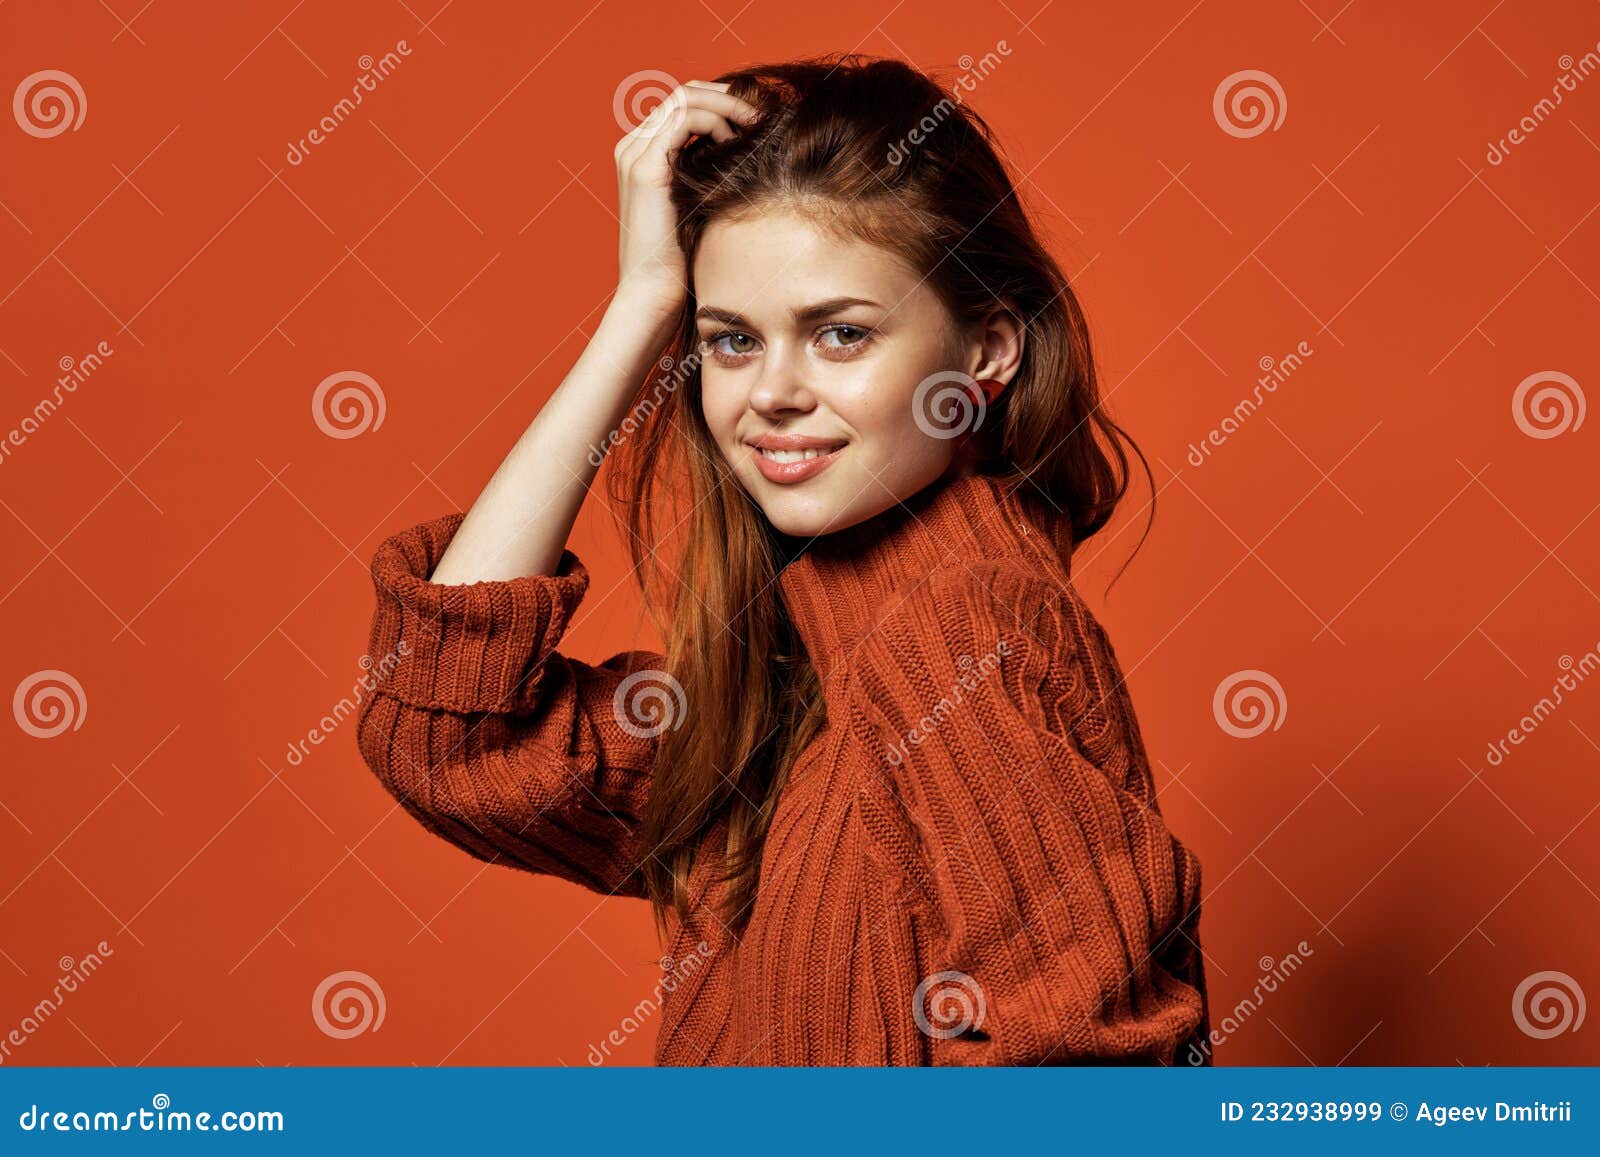 Woman in Red Sweater Clean Skin Hairstyle Fashion Studio Stock Image ...